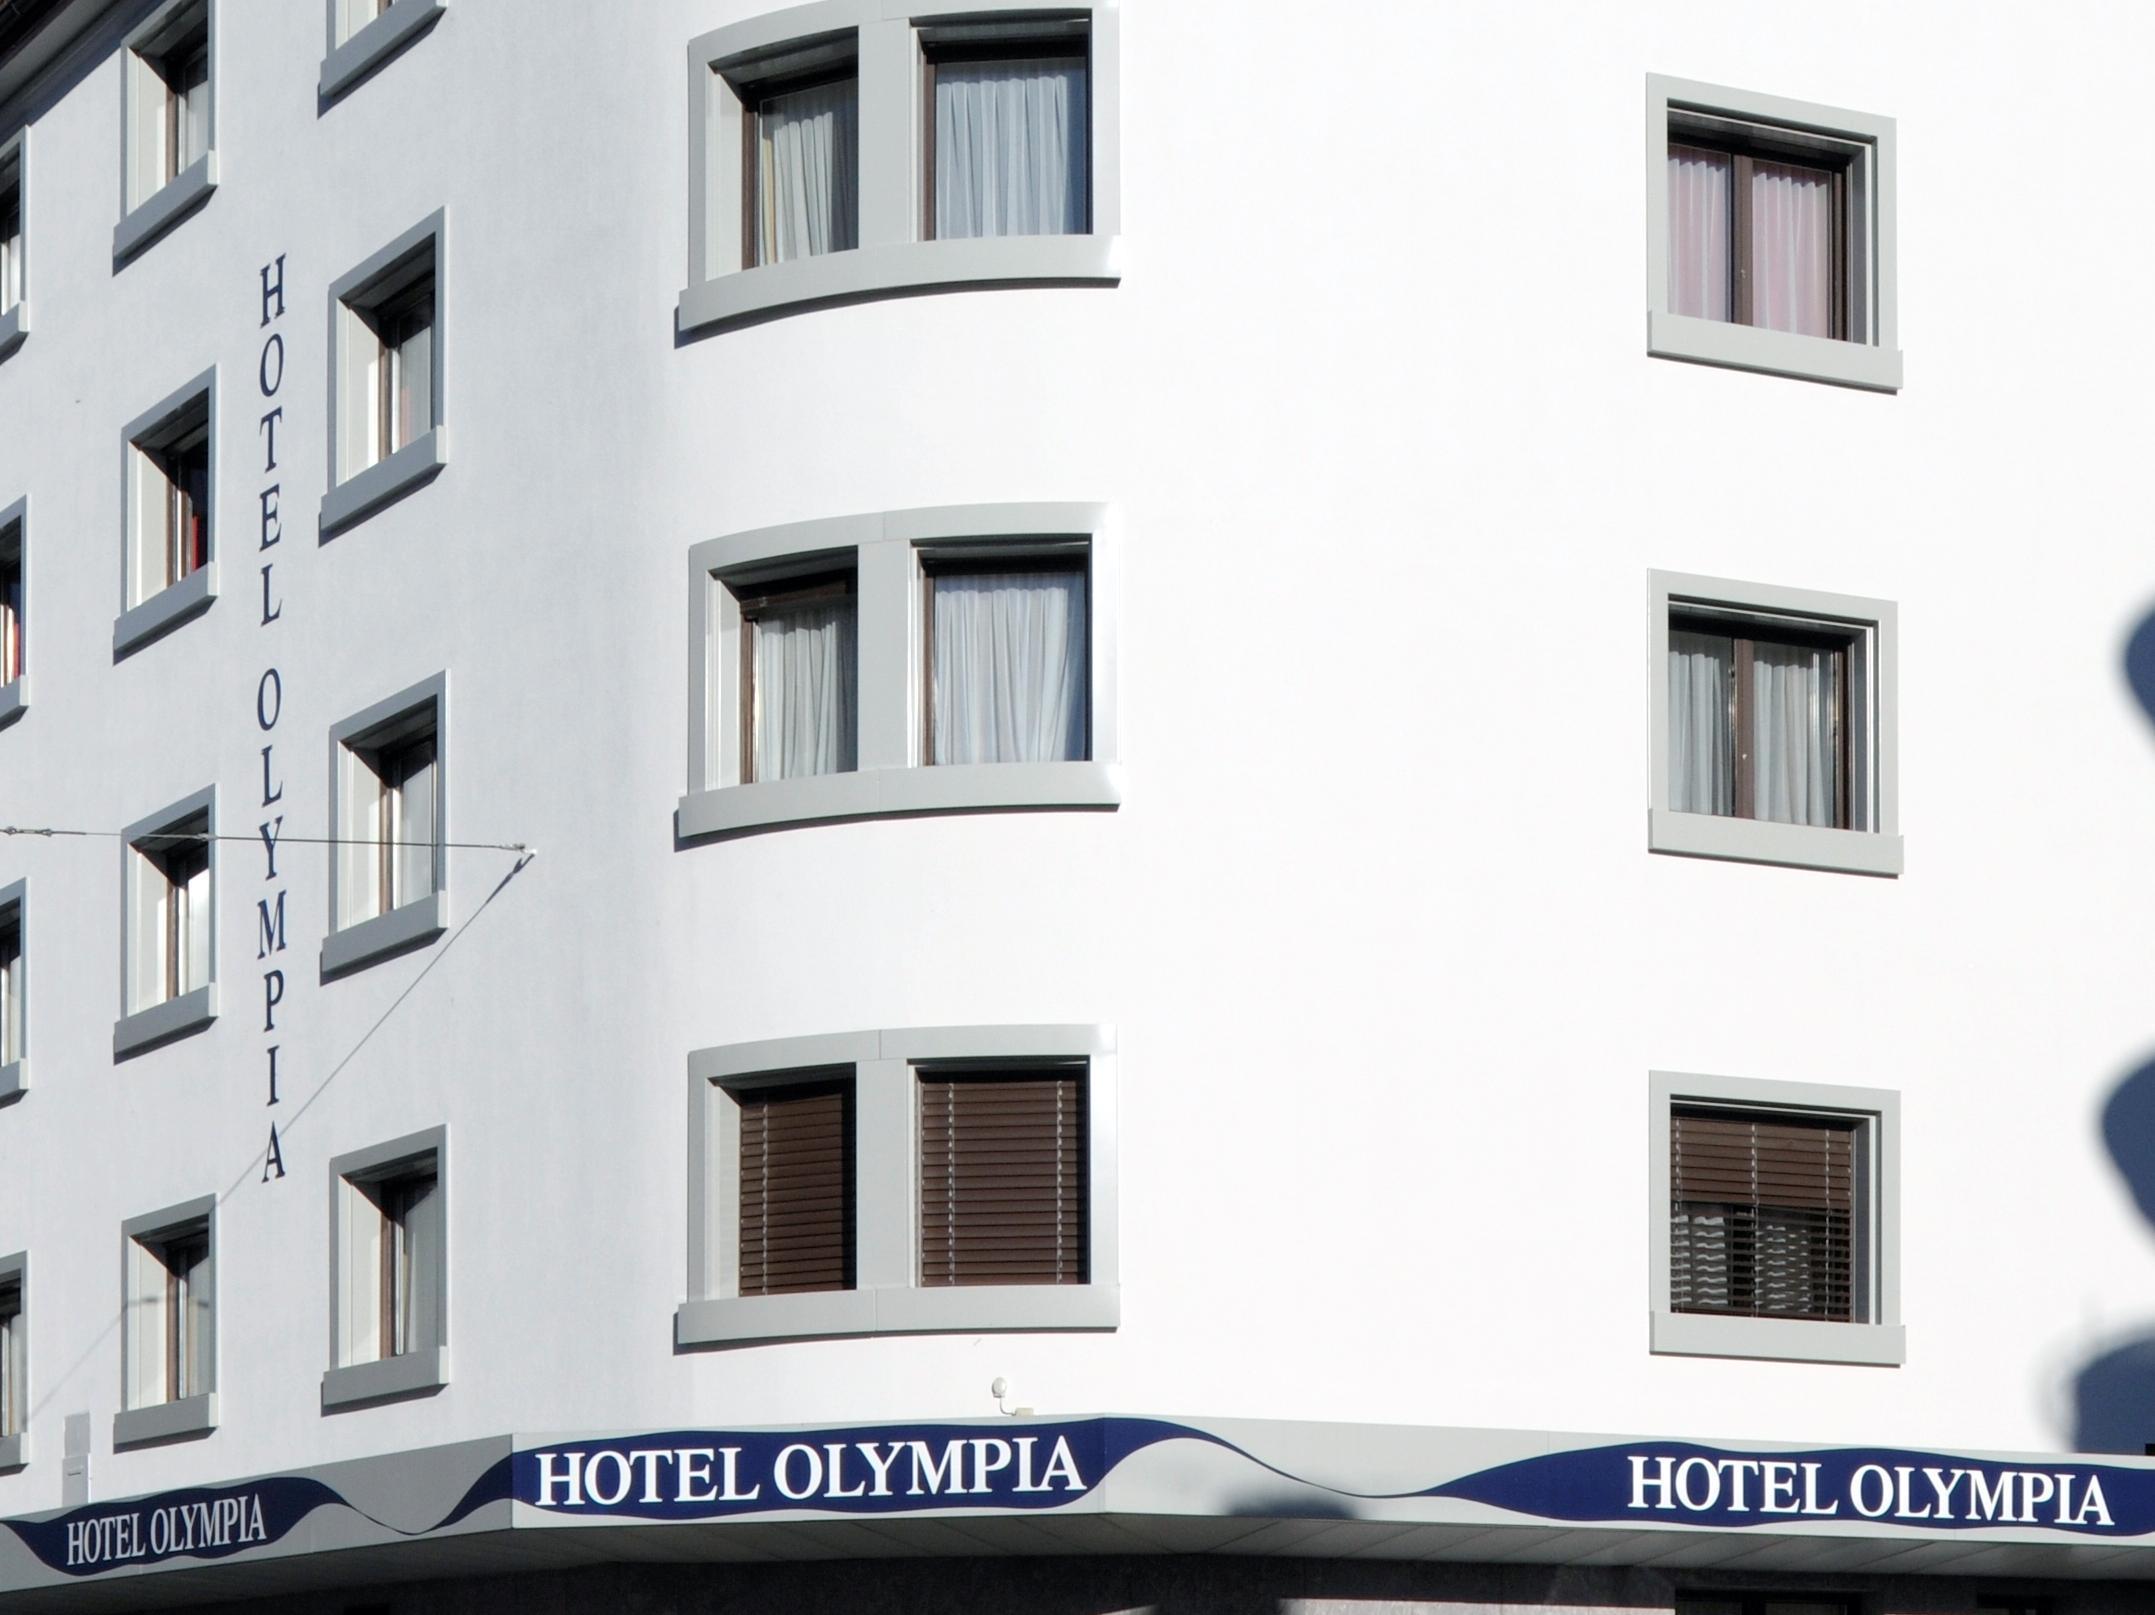 Olympia Hotel Zurich Zurich FAQ 2017, What facilities are there in Olympia Hotel Zurich Zurich 2017, What Languages Spoken are Supported in Olympia Hotel Zurich Zurich 2017, Which payment cards are accepted in Olympia Hotel Zurich Zurich , Zurich Olympia Hotel Zurich room facilities and services Q&A 2017, Zurich Olympia Hotel Zurich online booking services 2017, Zurich Olympia Hotel Zurich address 2017, Zurich Olympia Hotel Zurich telephone number 2017,Zurich Olympia Hotel Zurich map 2017, Zurich Olympia Hotel Zurich traffic guide 2017, how to go Zurich Olympia Hotel Zurich, Zurich Olympia Hotel Zurich booking online 2017, Zurich Olympia Hotel Zurich room types 2017.